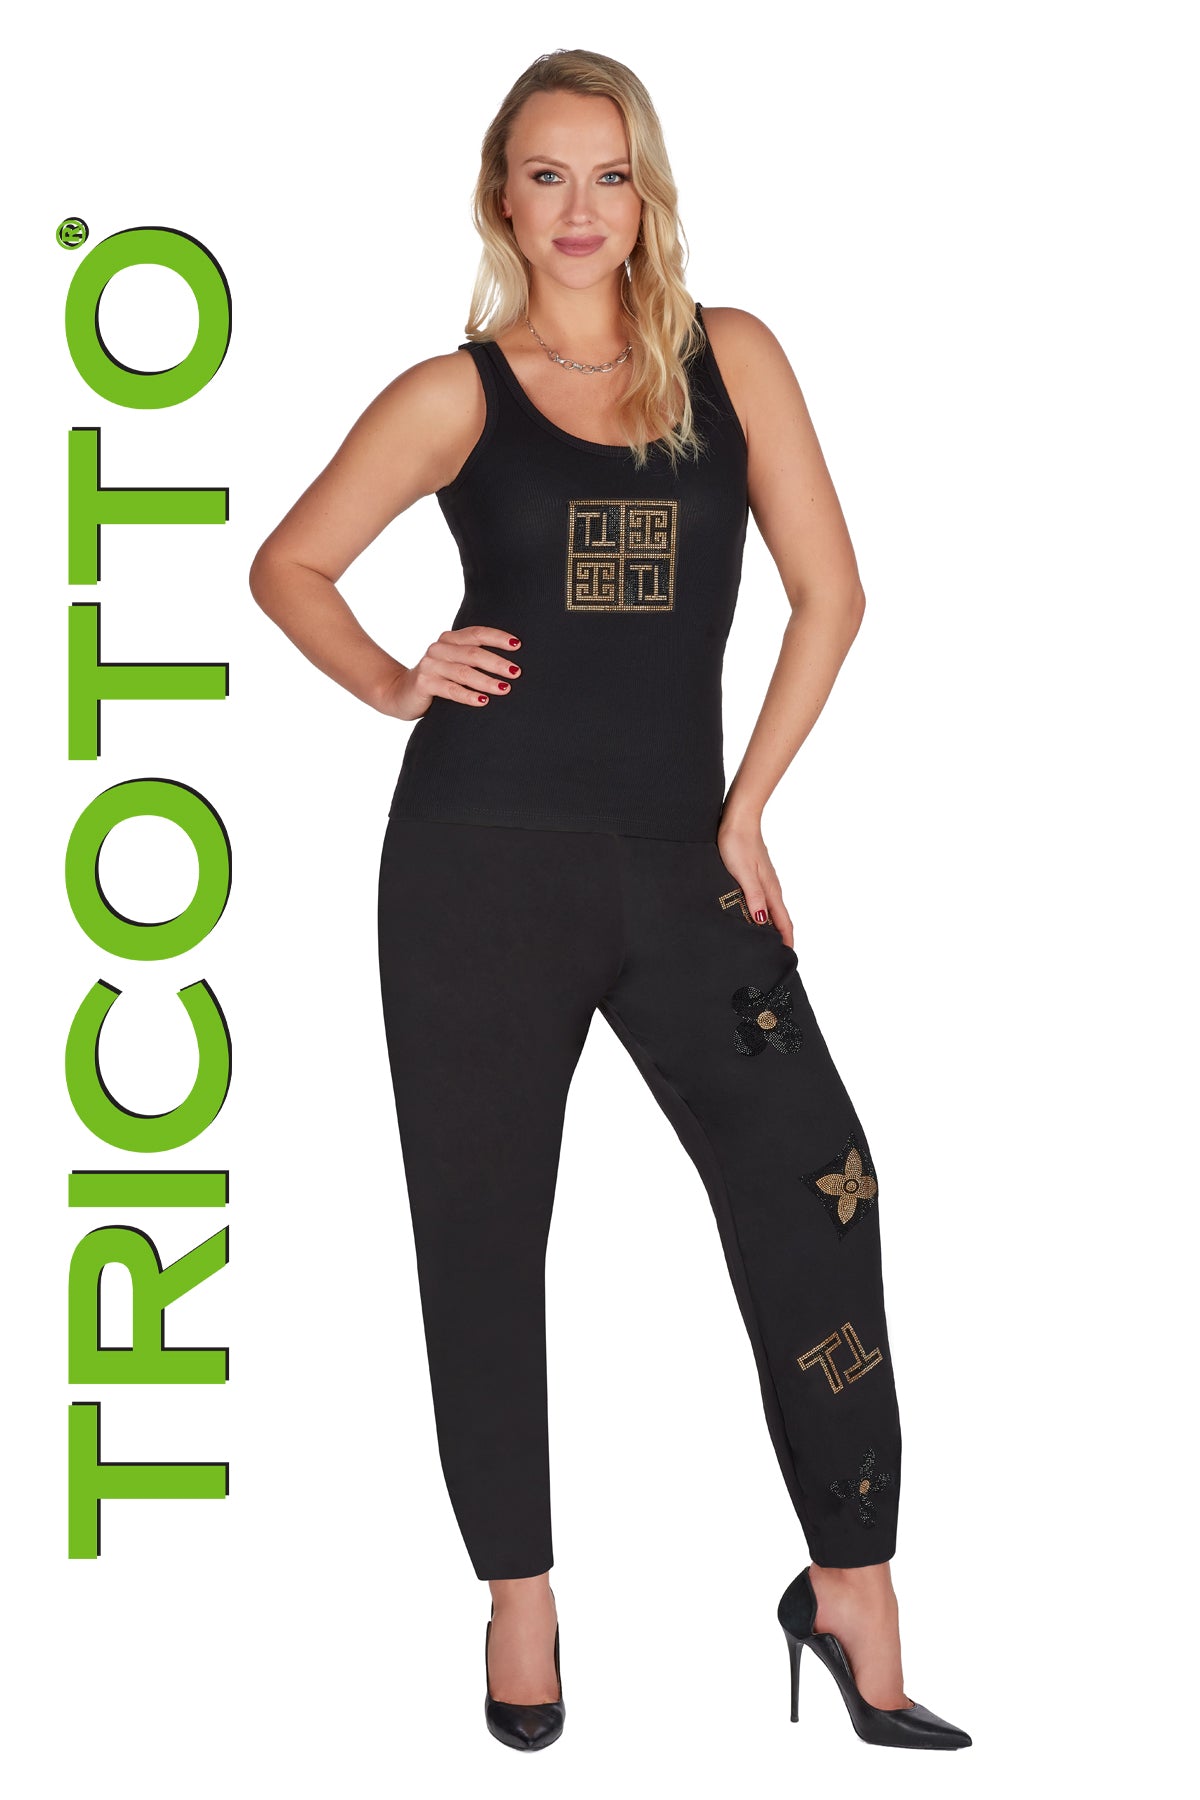 Tricotto Gold Camisole-Buy Tricotto Clothing Online Canada-Tricotto Clothing Quebec-Women's Camisoles Online Canada